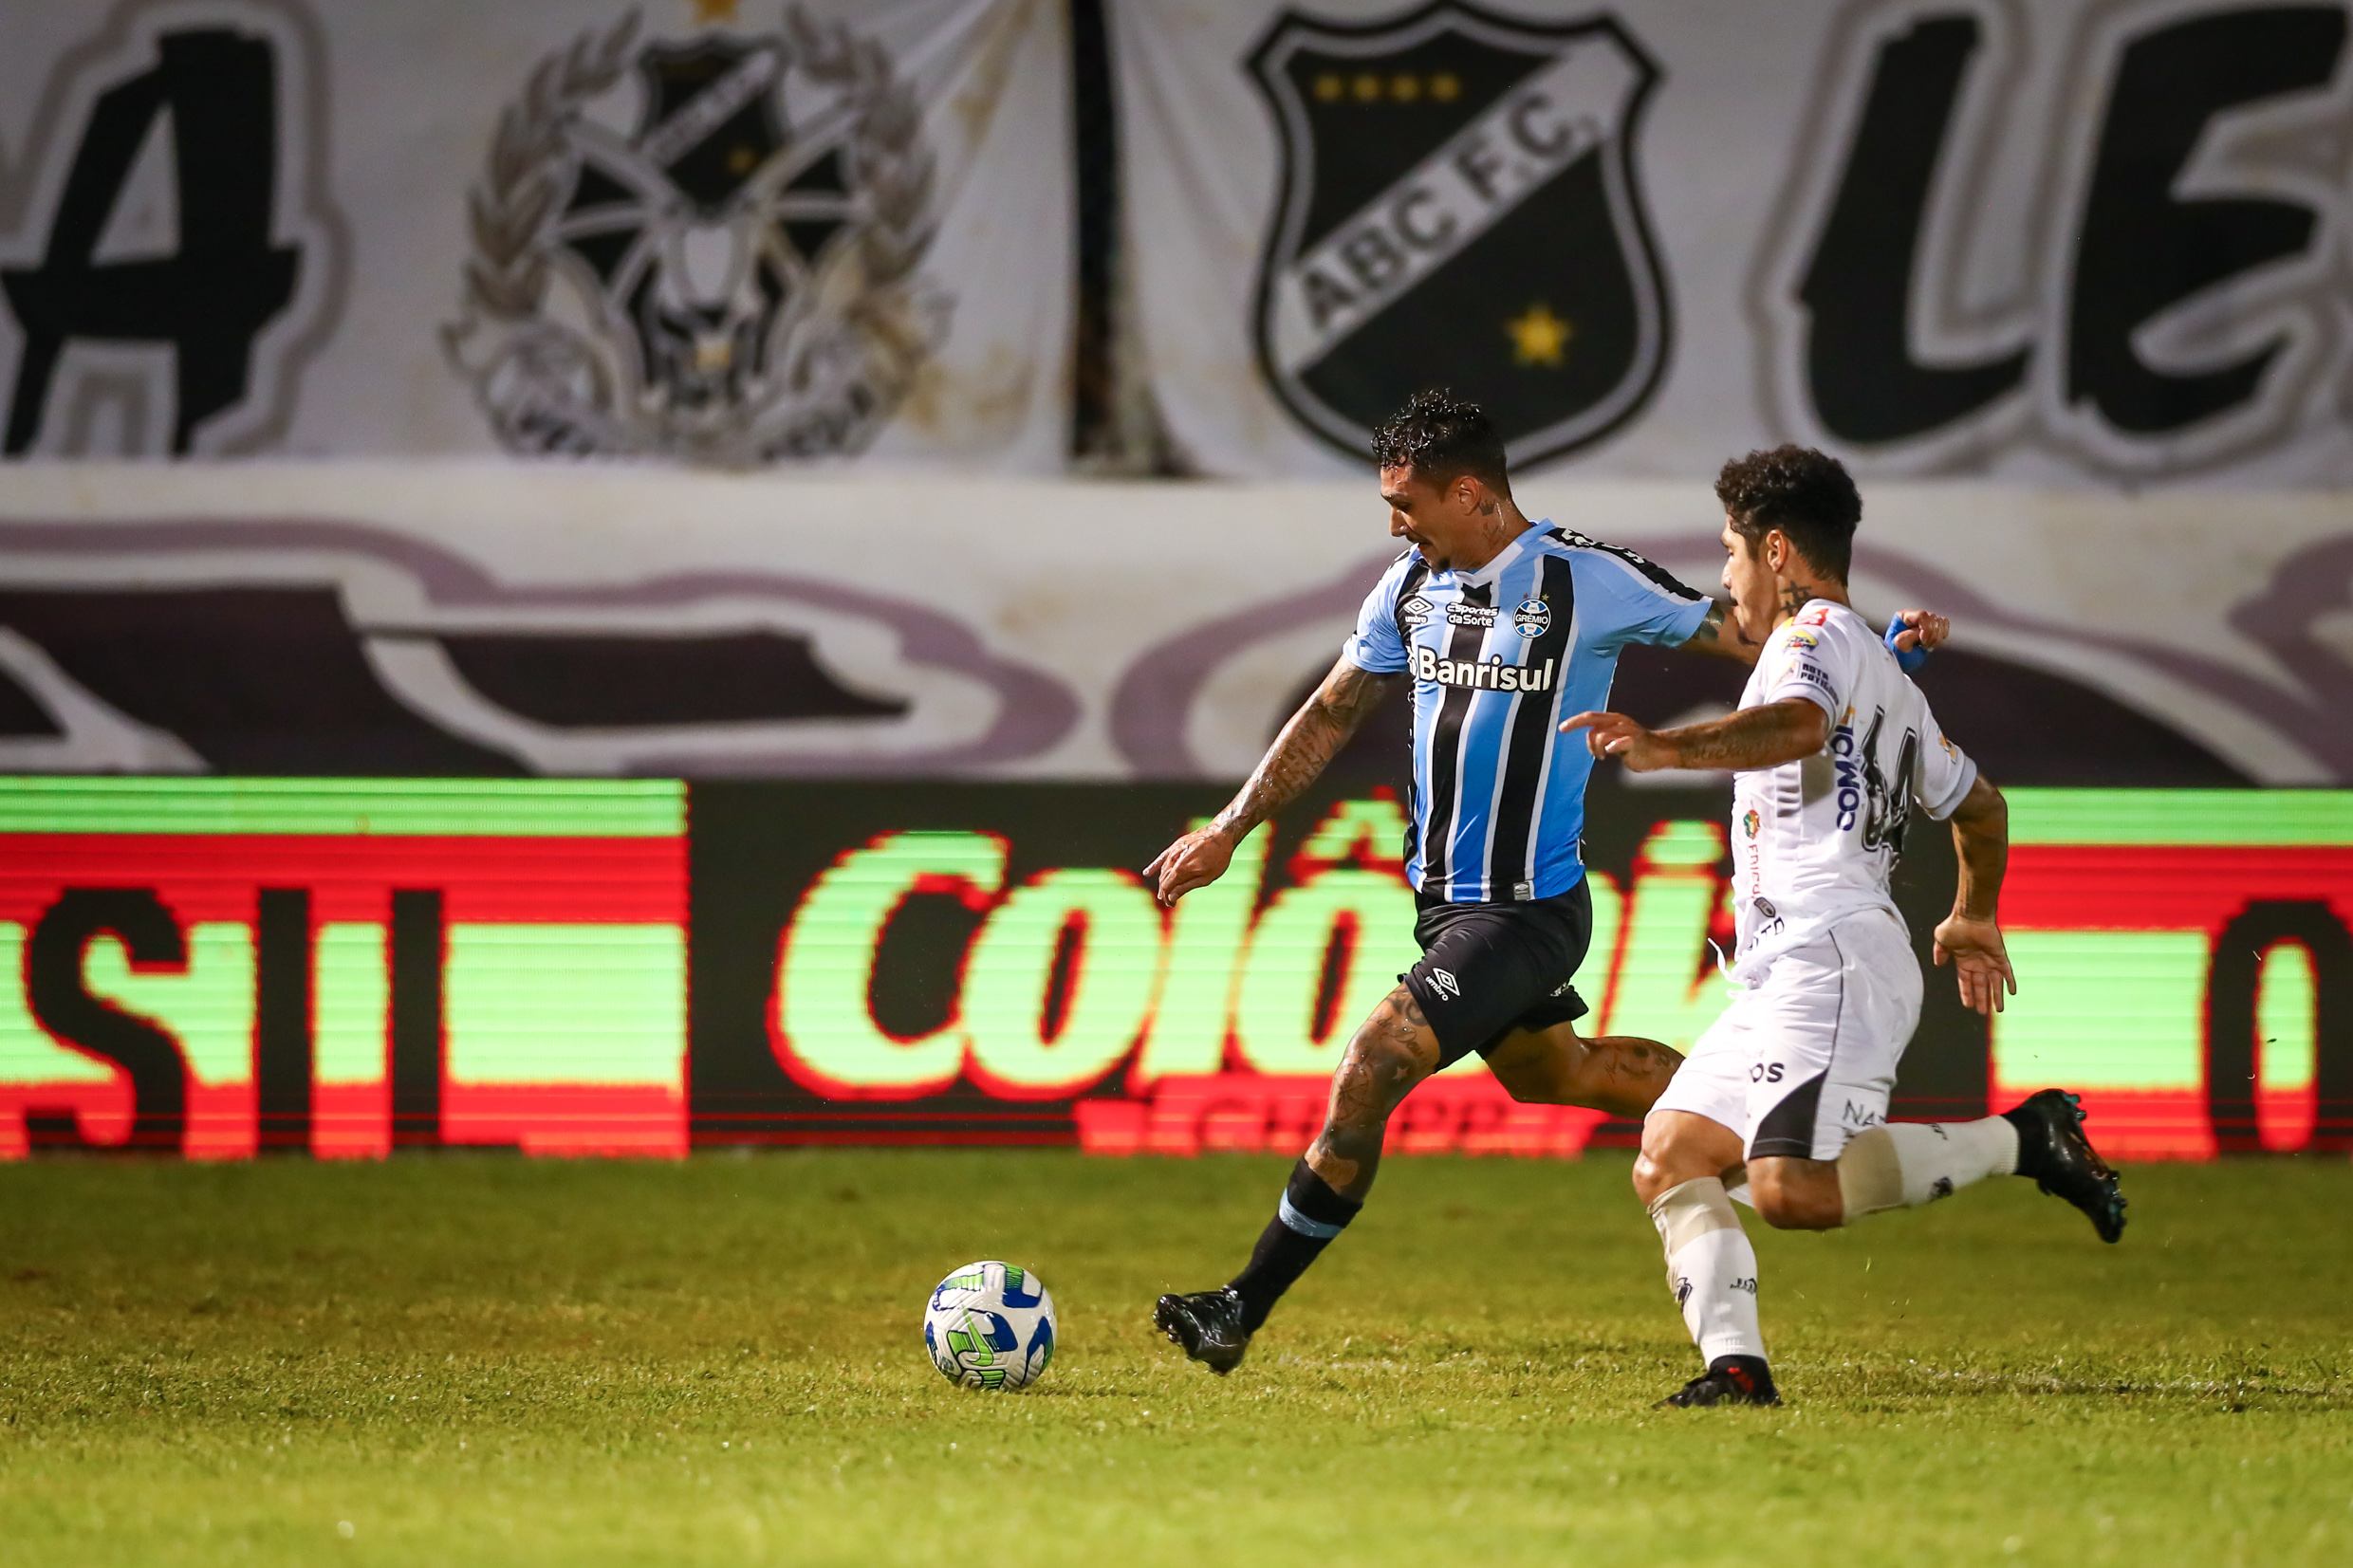 Grêmio vs ABC: An Exciting Clash of Two Strong Teams